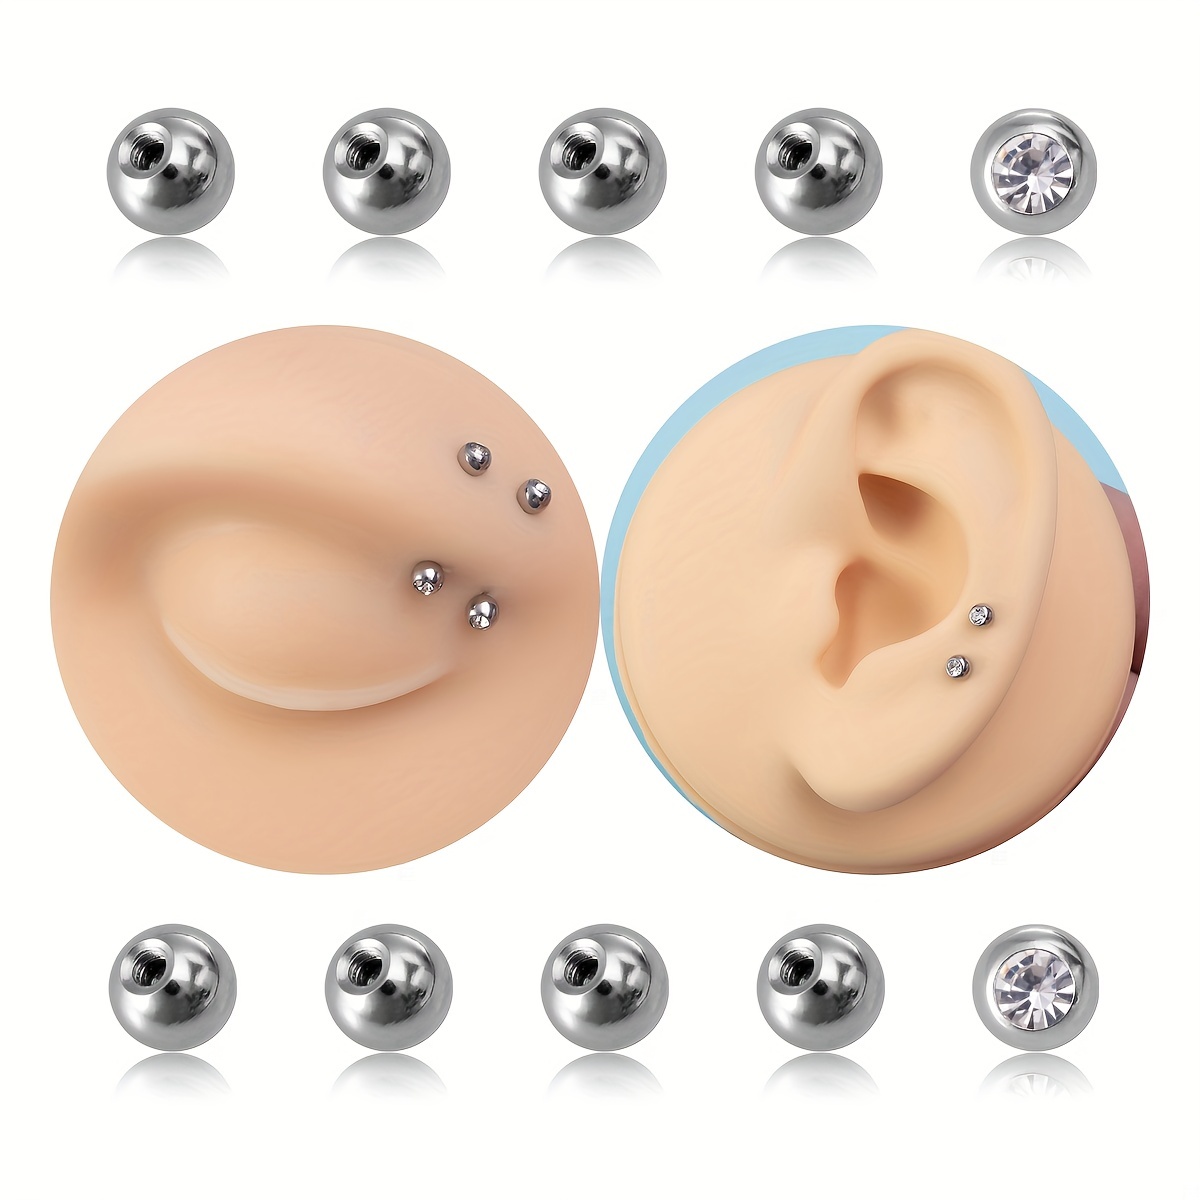 When to Change Ball Stretching Rings? - Body Jewelry & Piercing